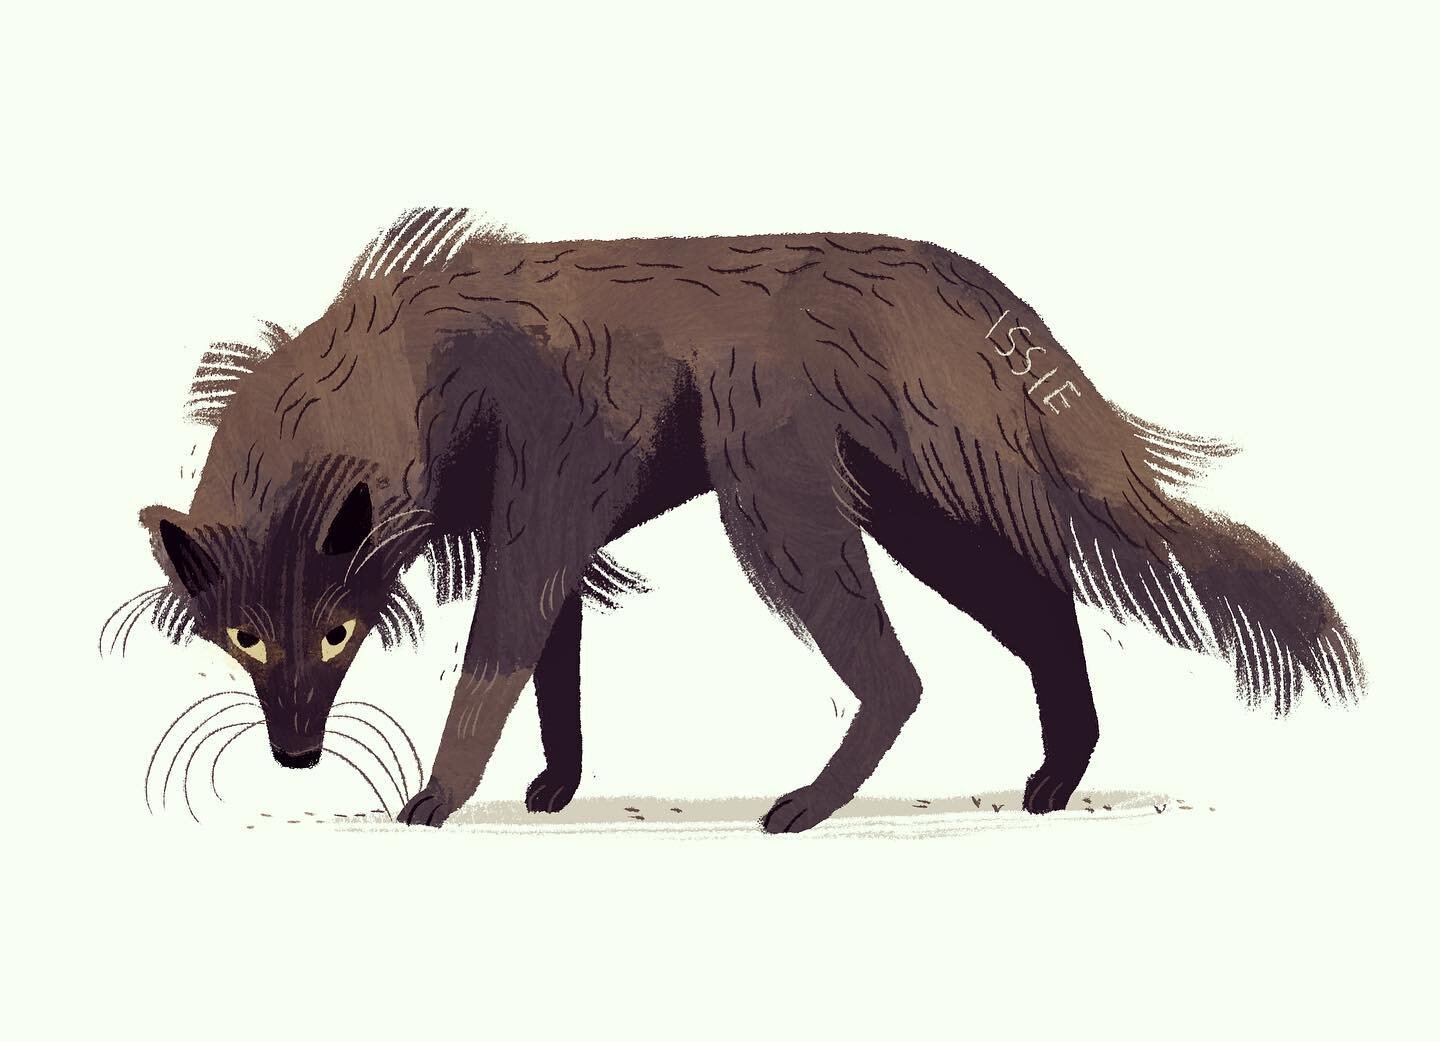 Putting all effort in to Mochi and book work right now, and there&rsquo;s little energy left for anything else. 

I&rsquo;ll be right back, and until then, here&rsquo;s a howling one. 🖤

#blackwolf #illustration #drawing